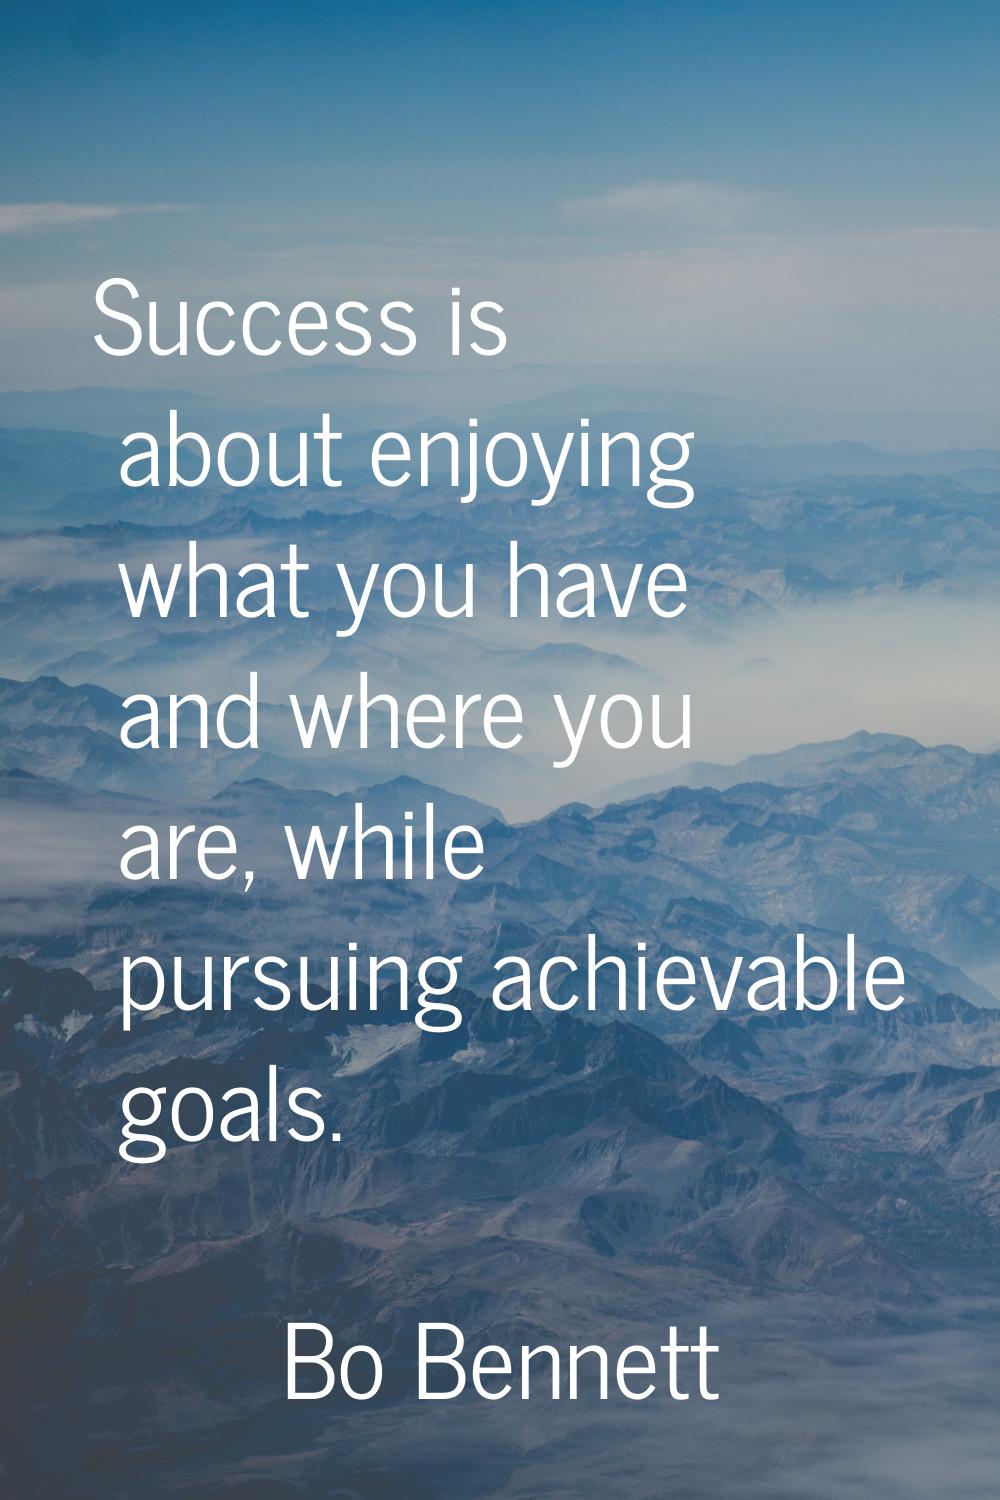 Success is about enjoying what you have and where you are, while pursuing achievable goals.